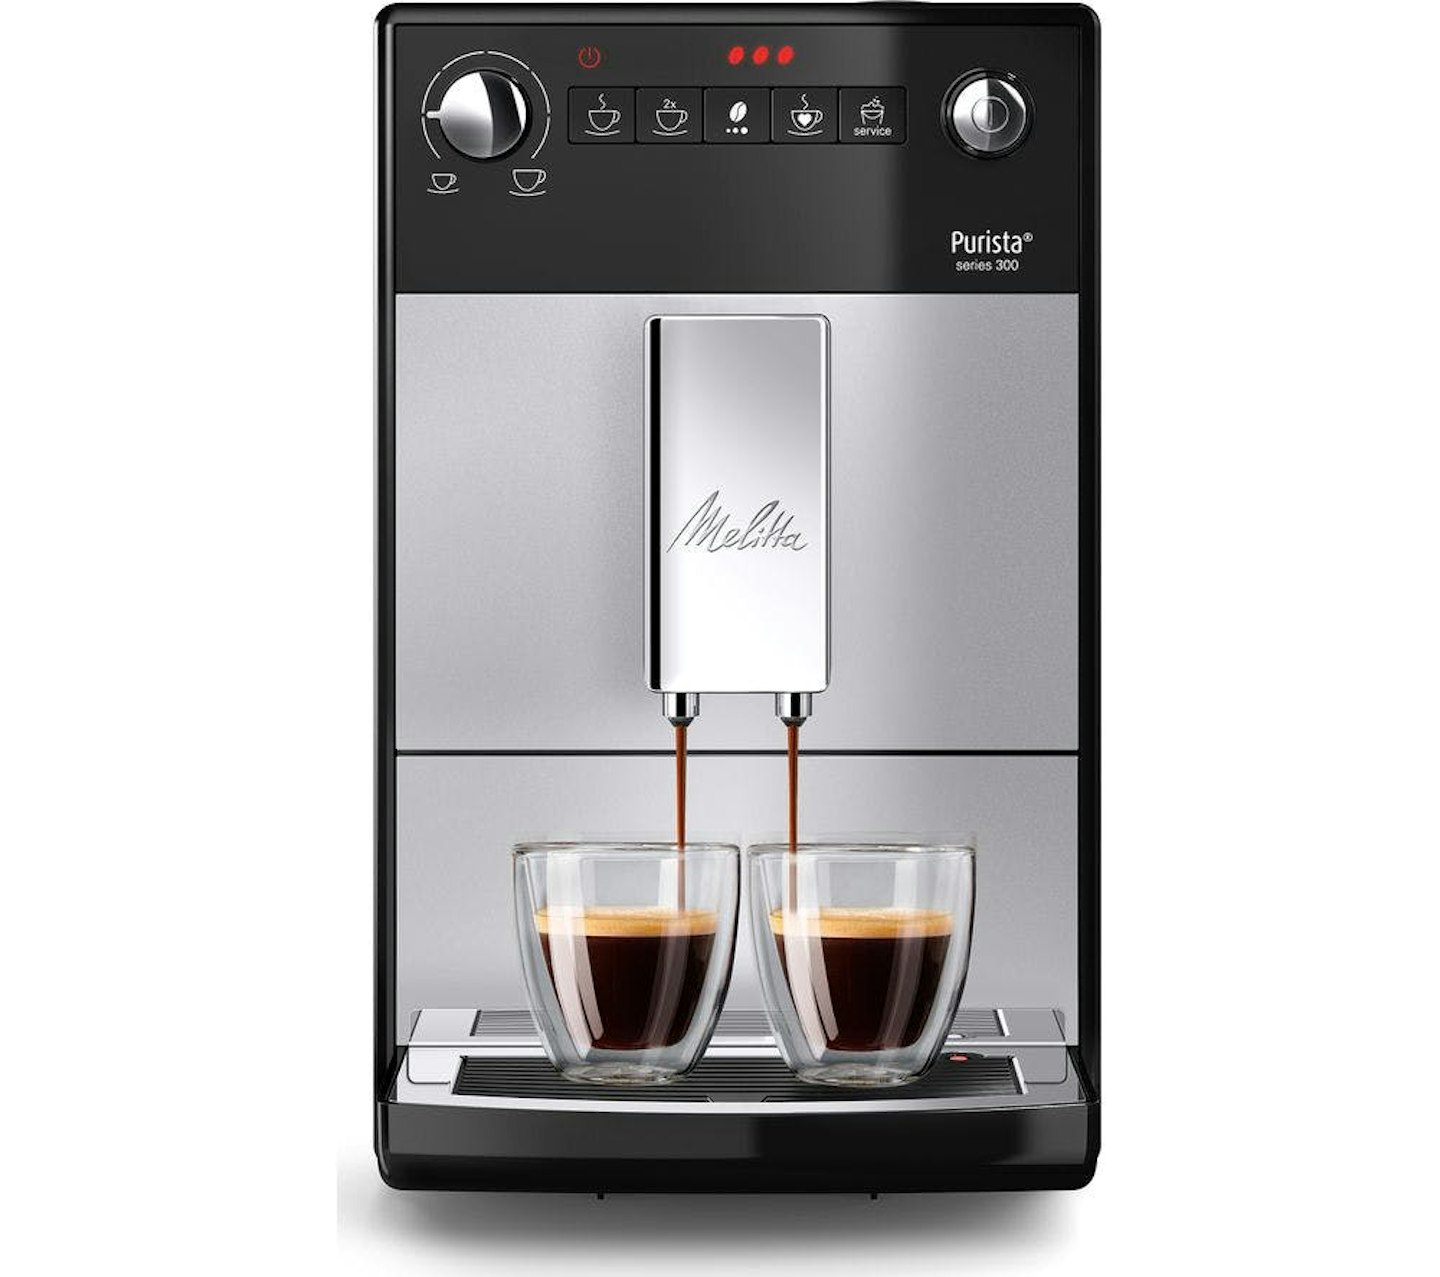 The best bean-to-cup coffee machines: Melitta Purista F230-101 Bean to Cup Coffee Machine